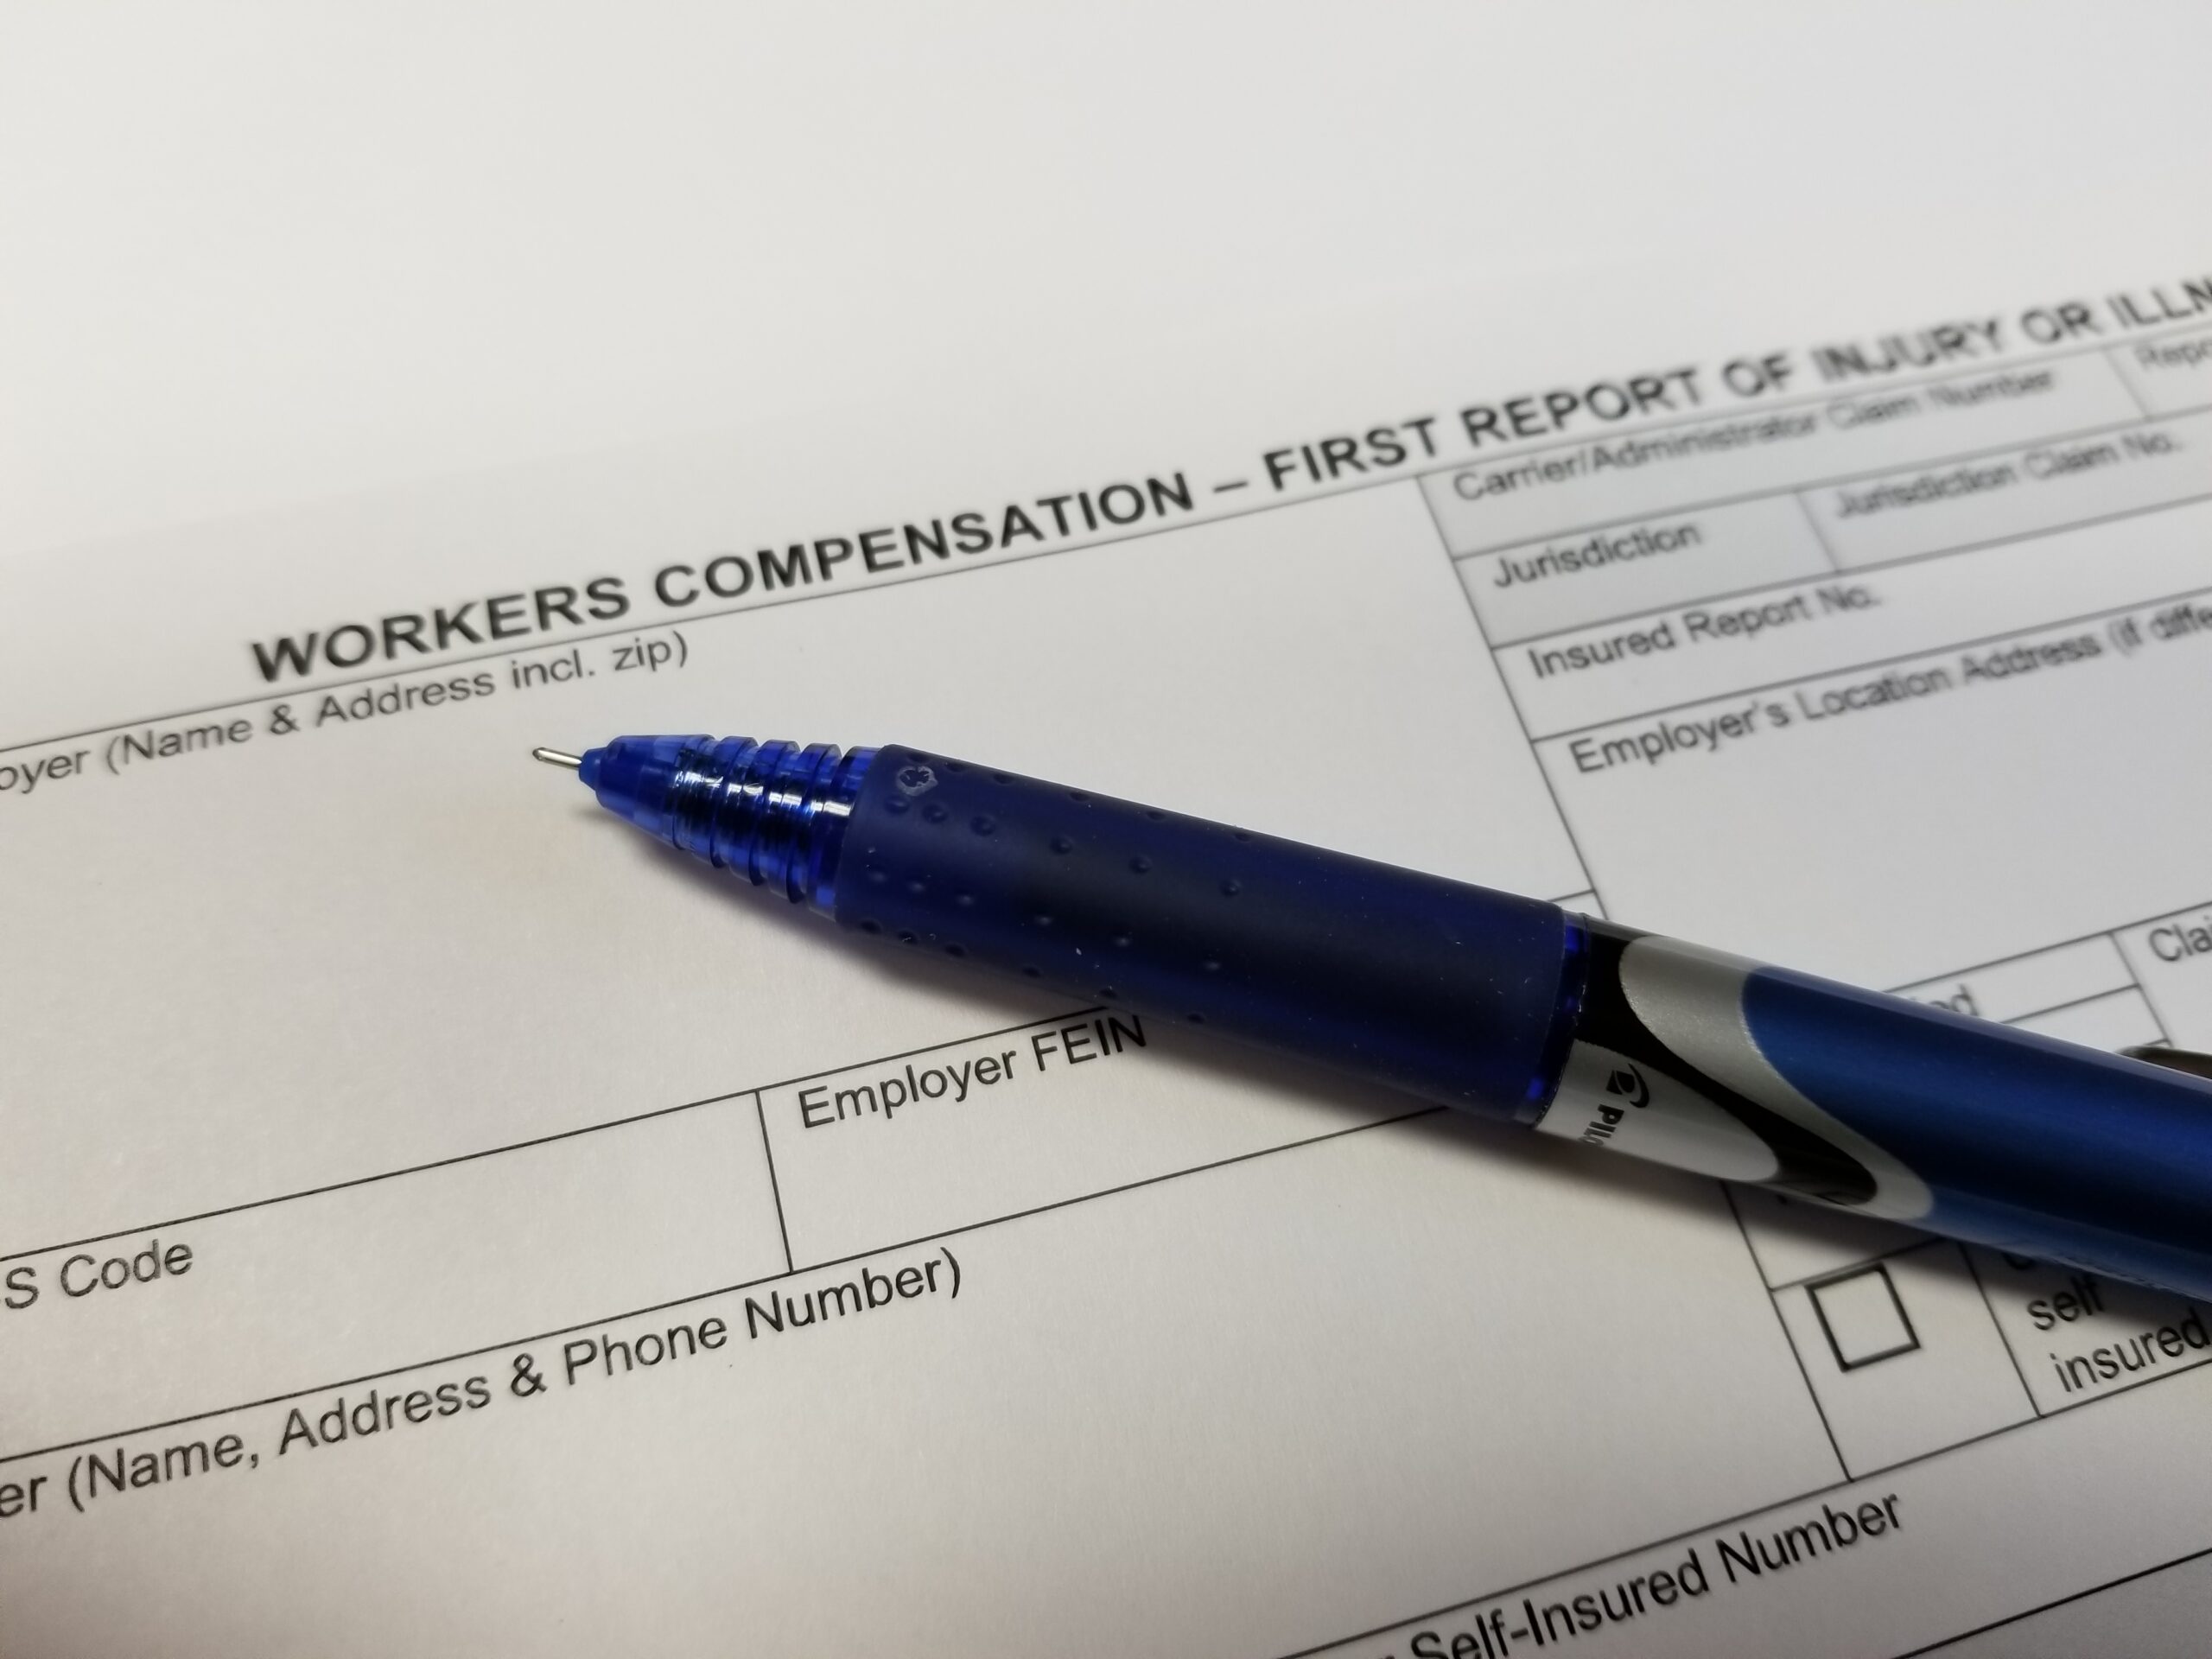 Coeur d'Alene Idaho Workers' Compensation First Report of Injury